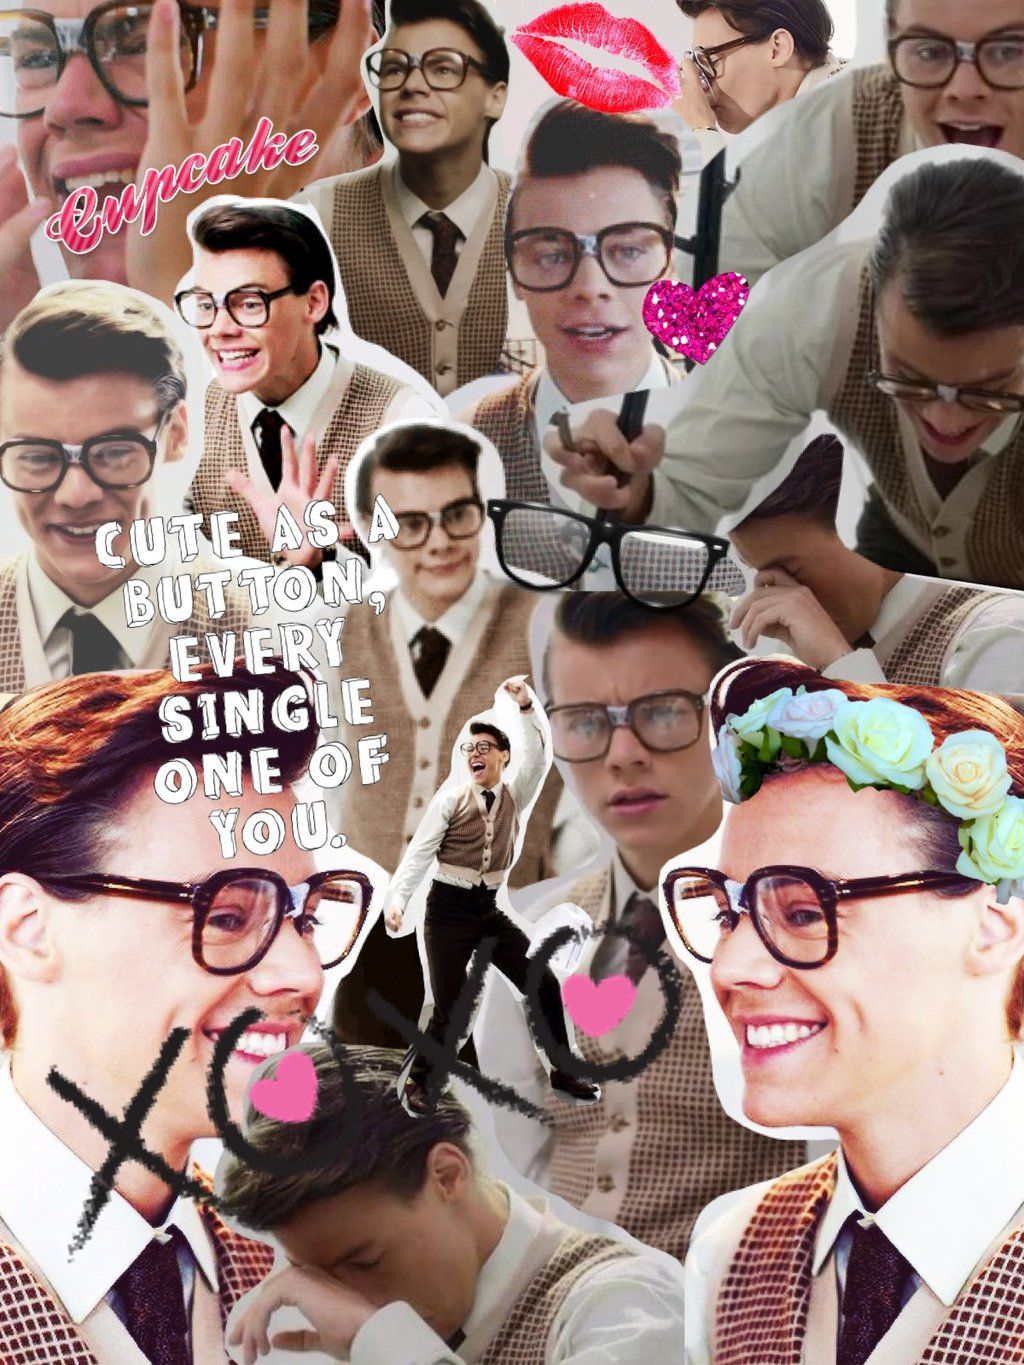 Harry Styles Collage Wallpapers - Wallpaper Cave